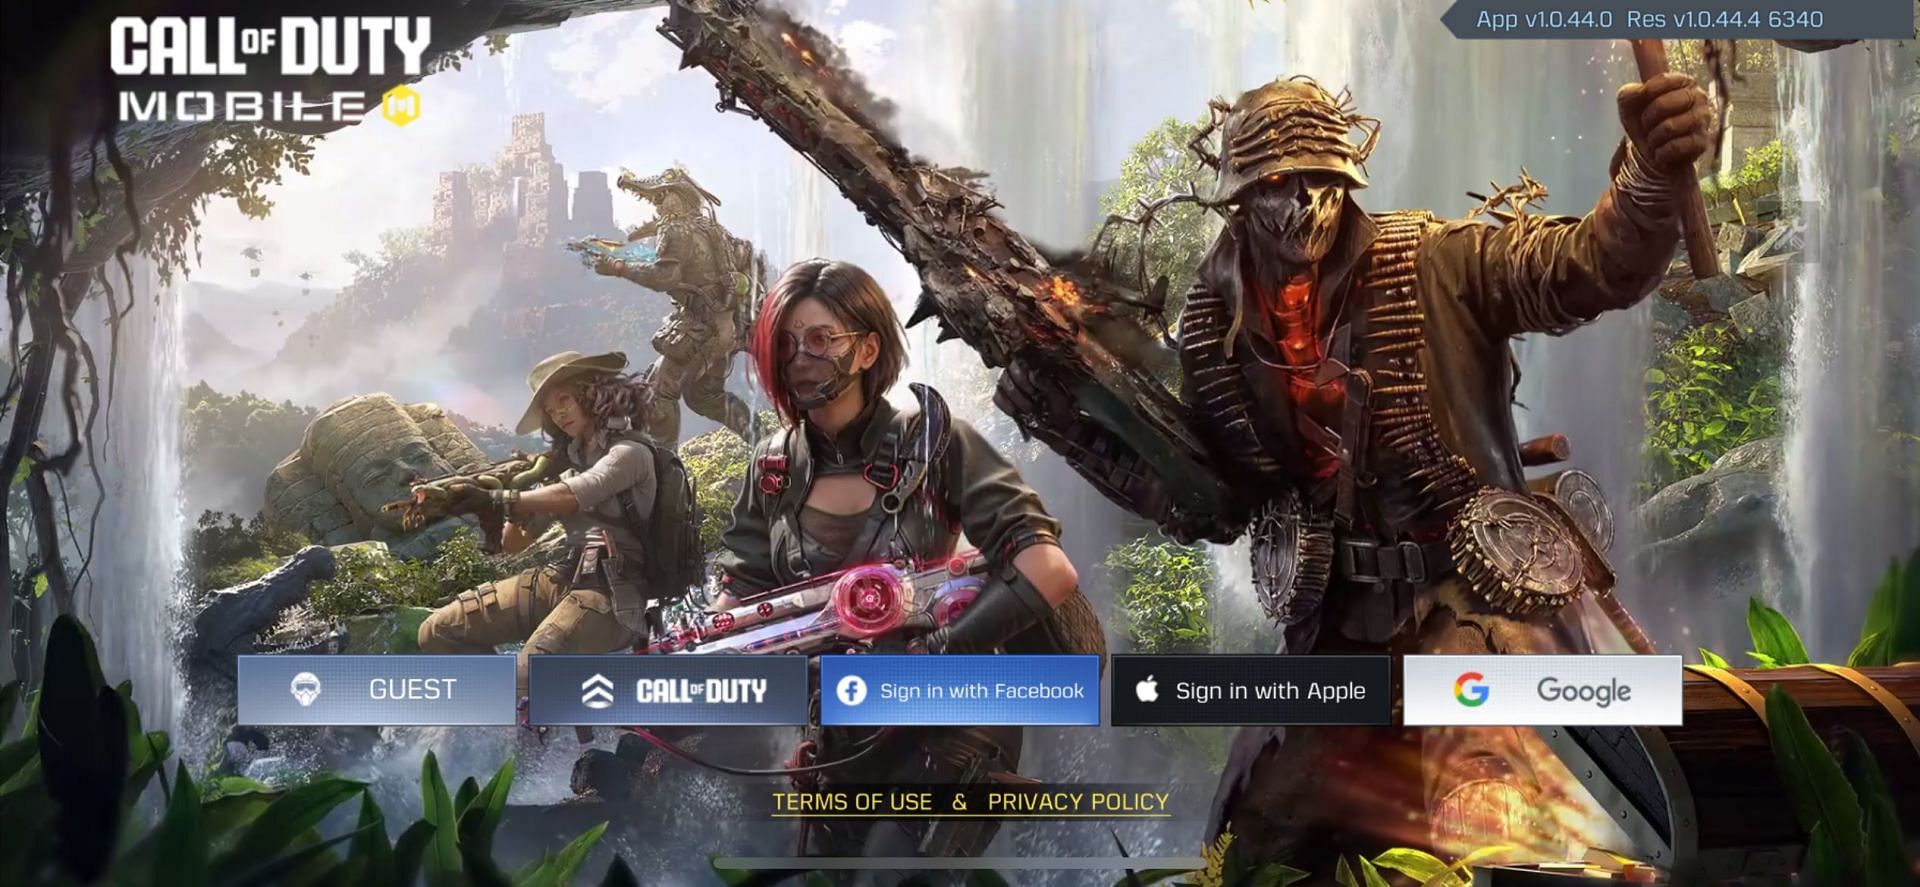 Login window in the game (Image via Activision)